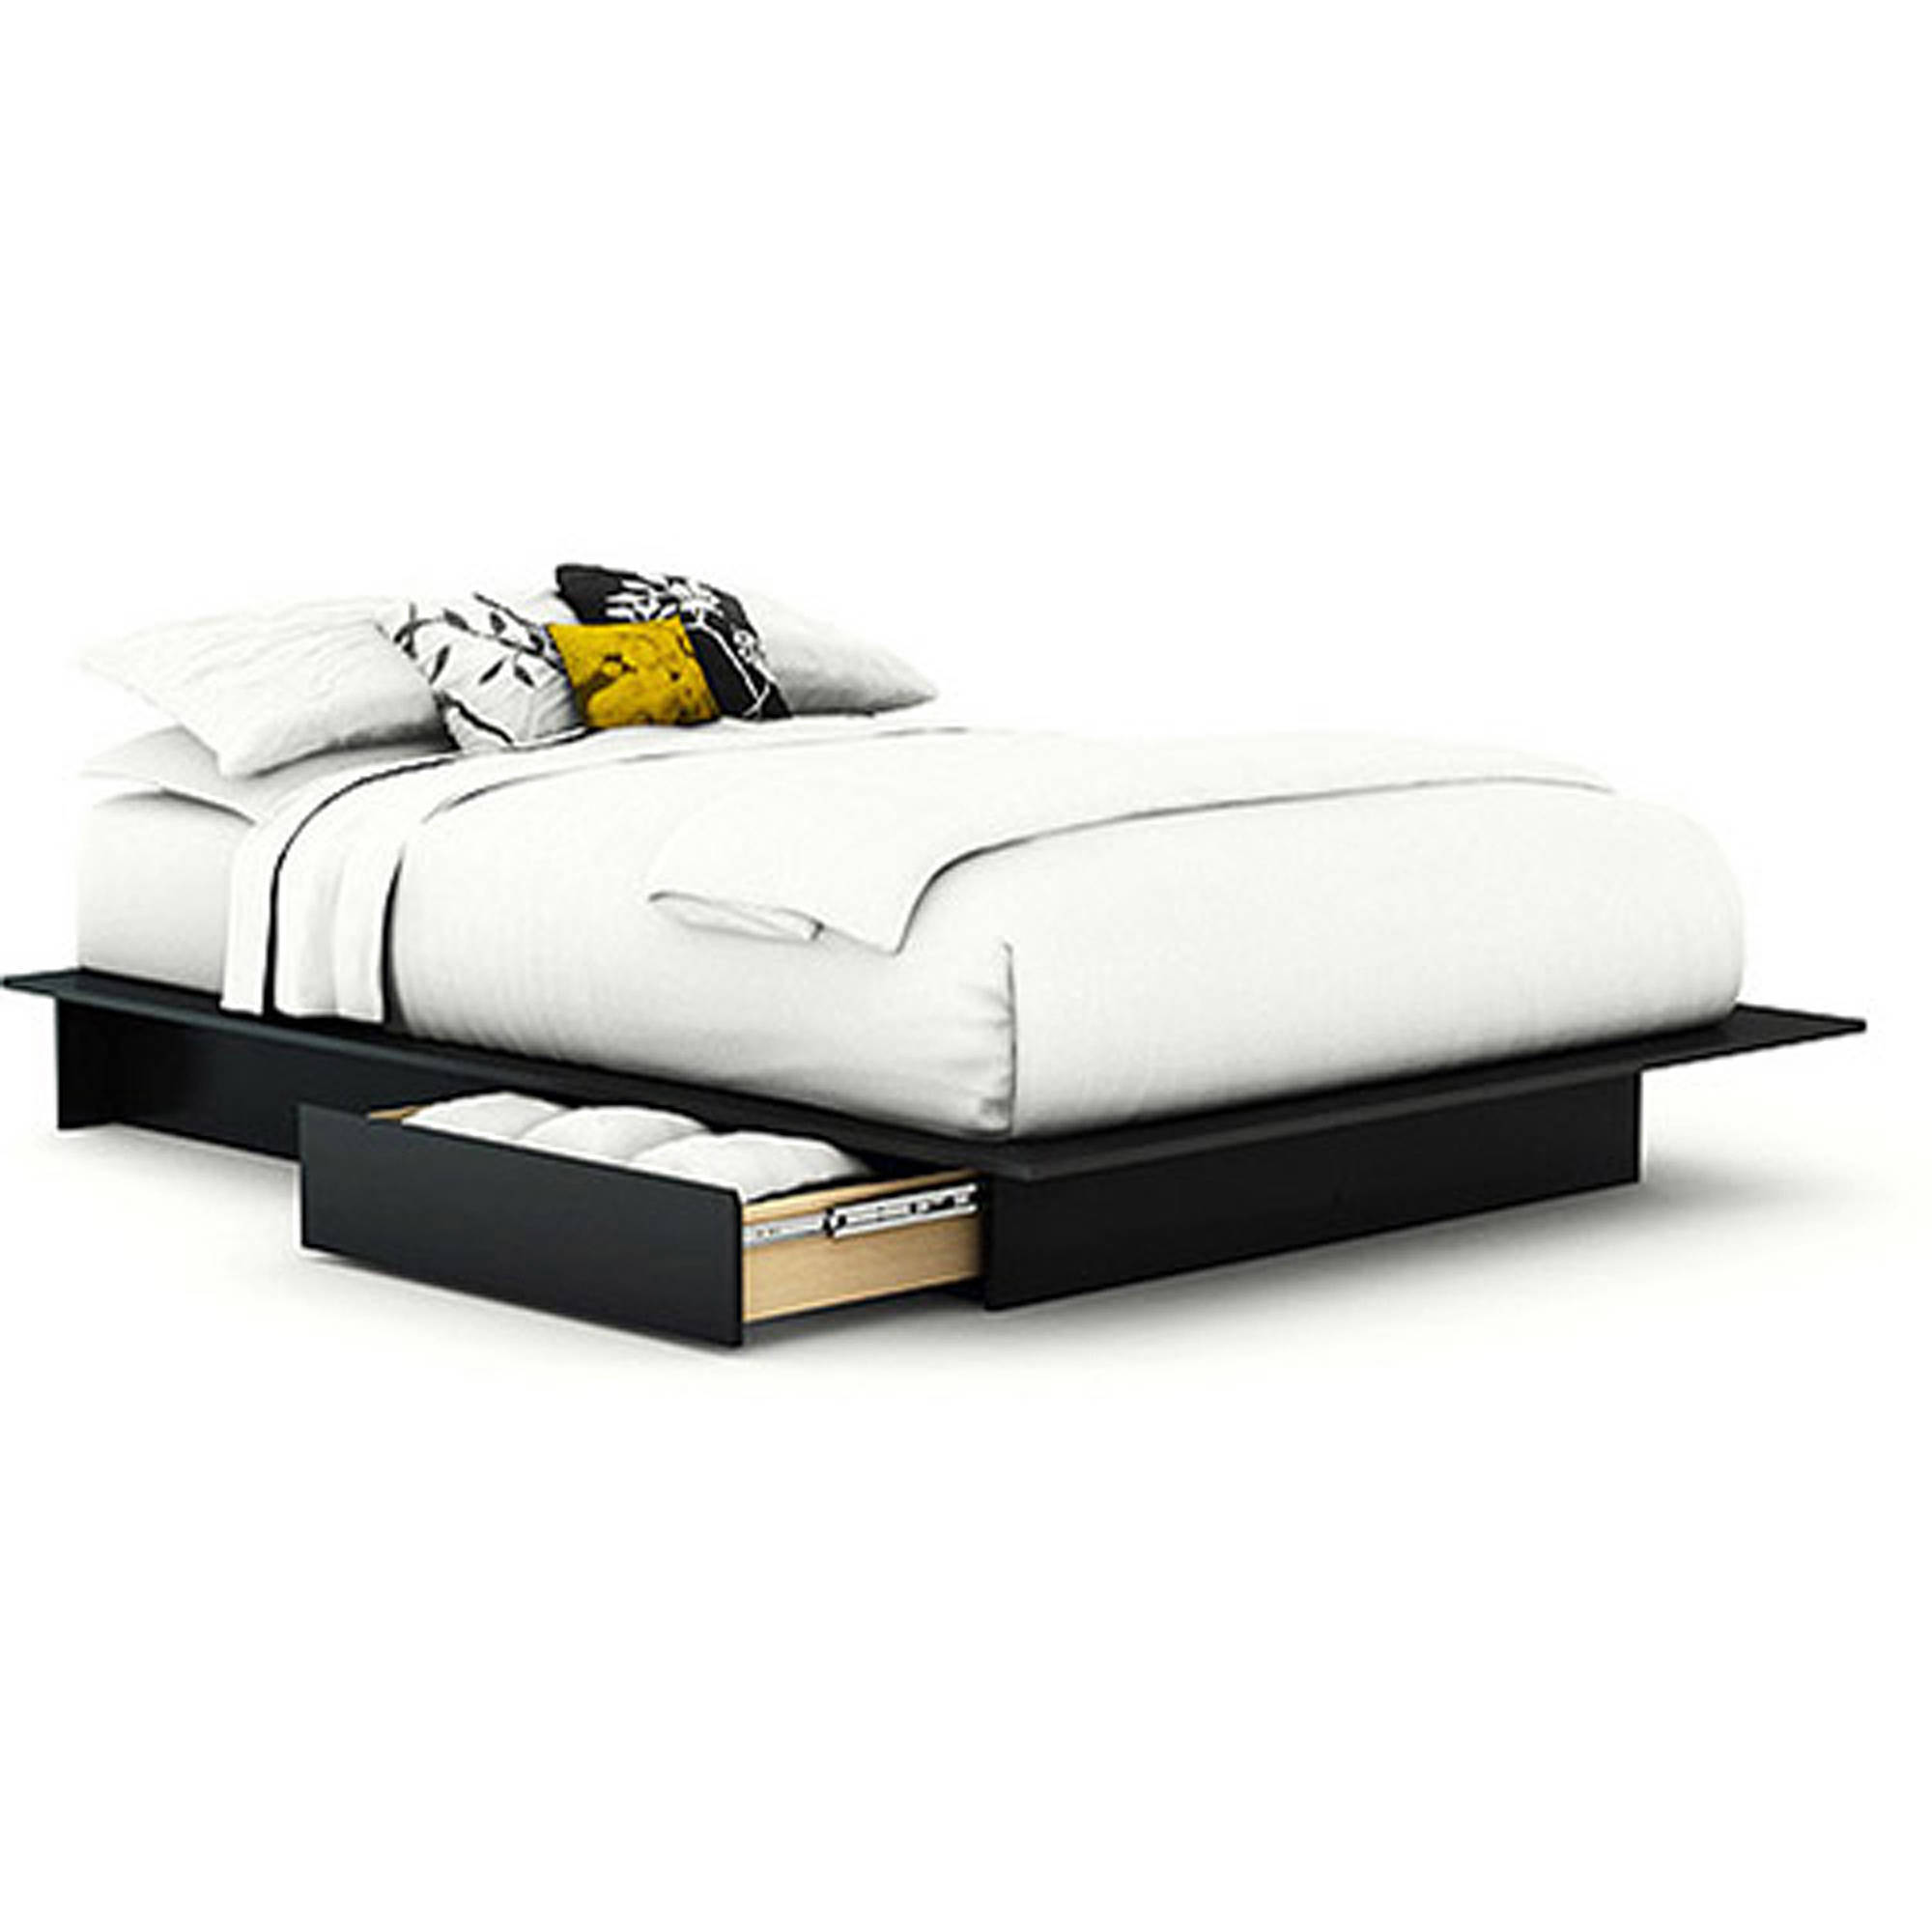 South Shore SoHo Full/Queen Storage Platform Bed with 2 Drawers, Multiple Finishes - image 1 of 7